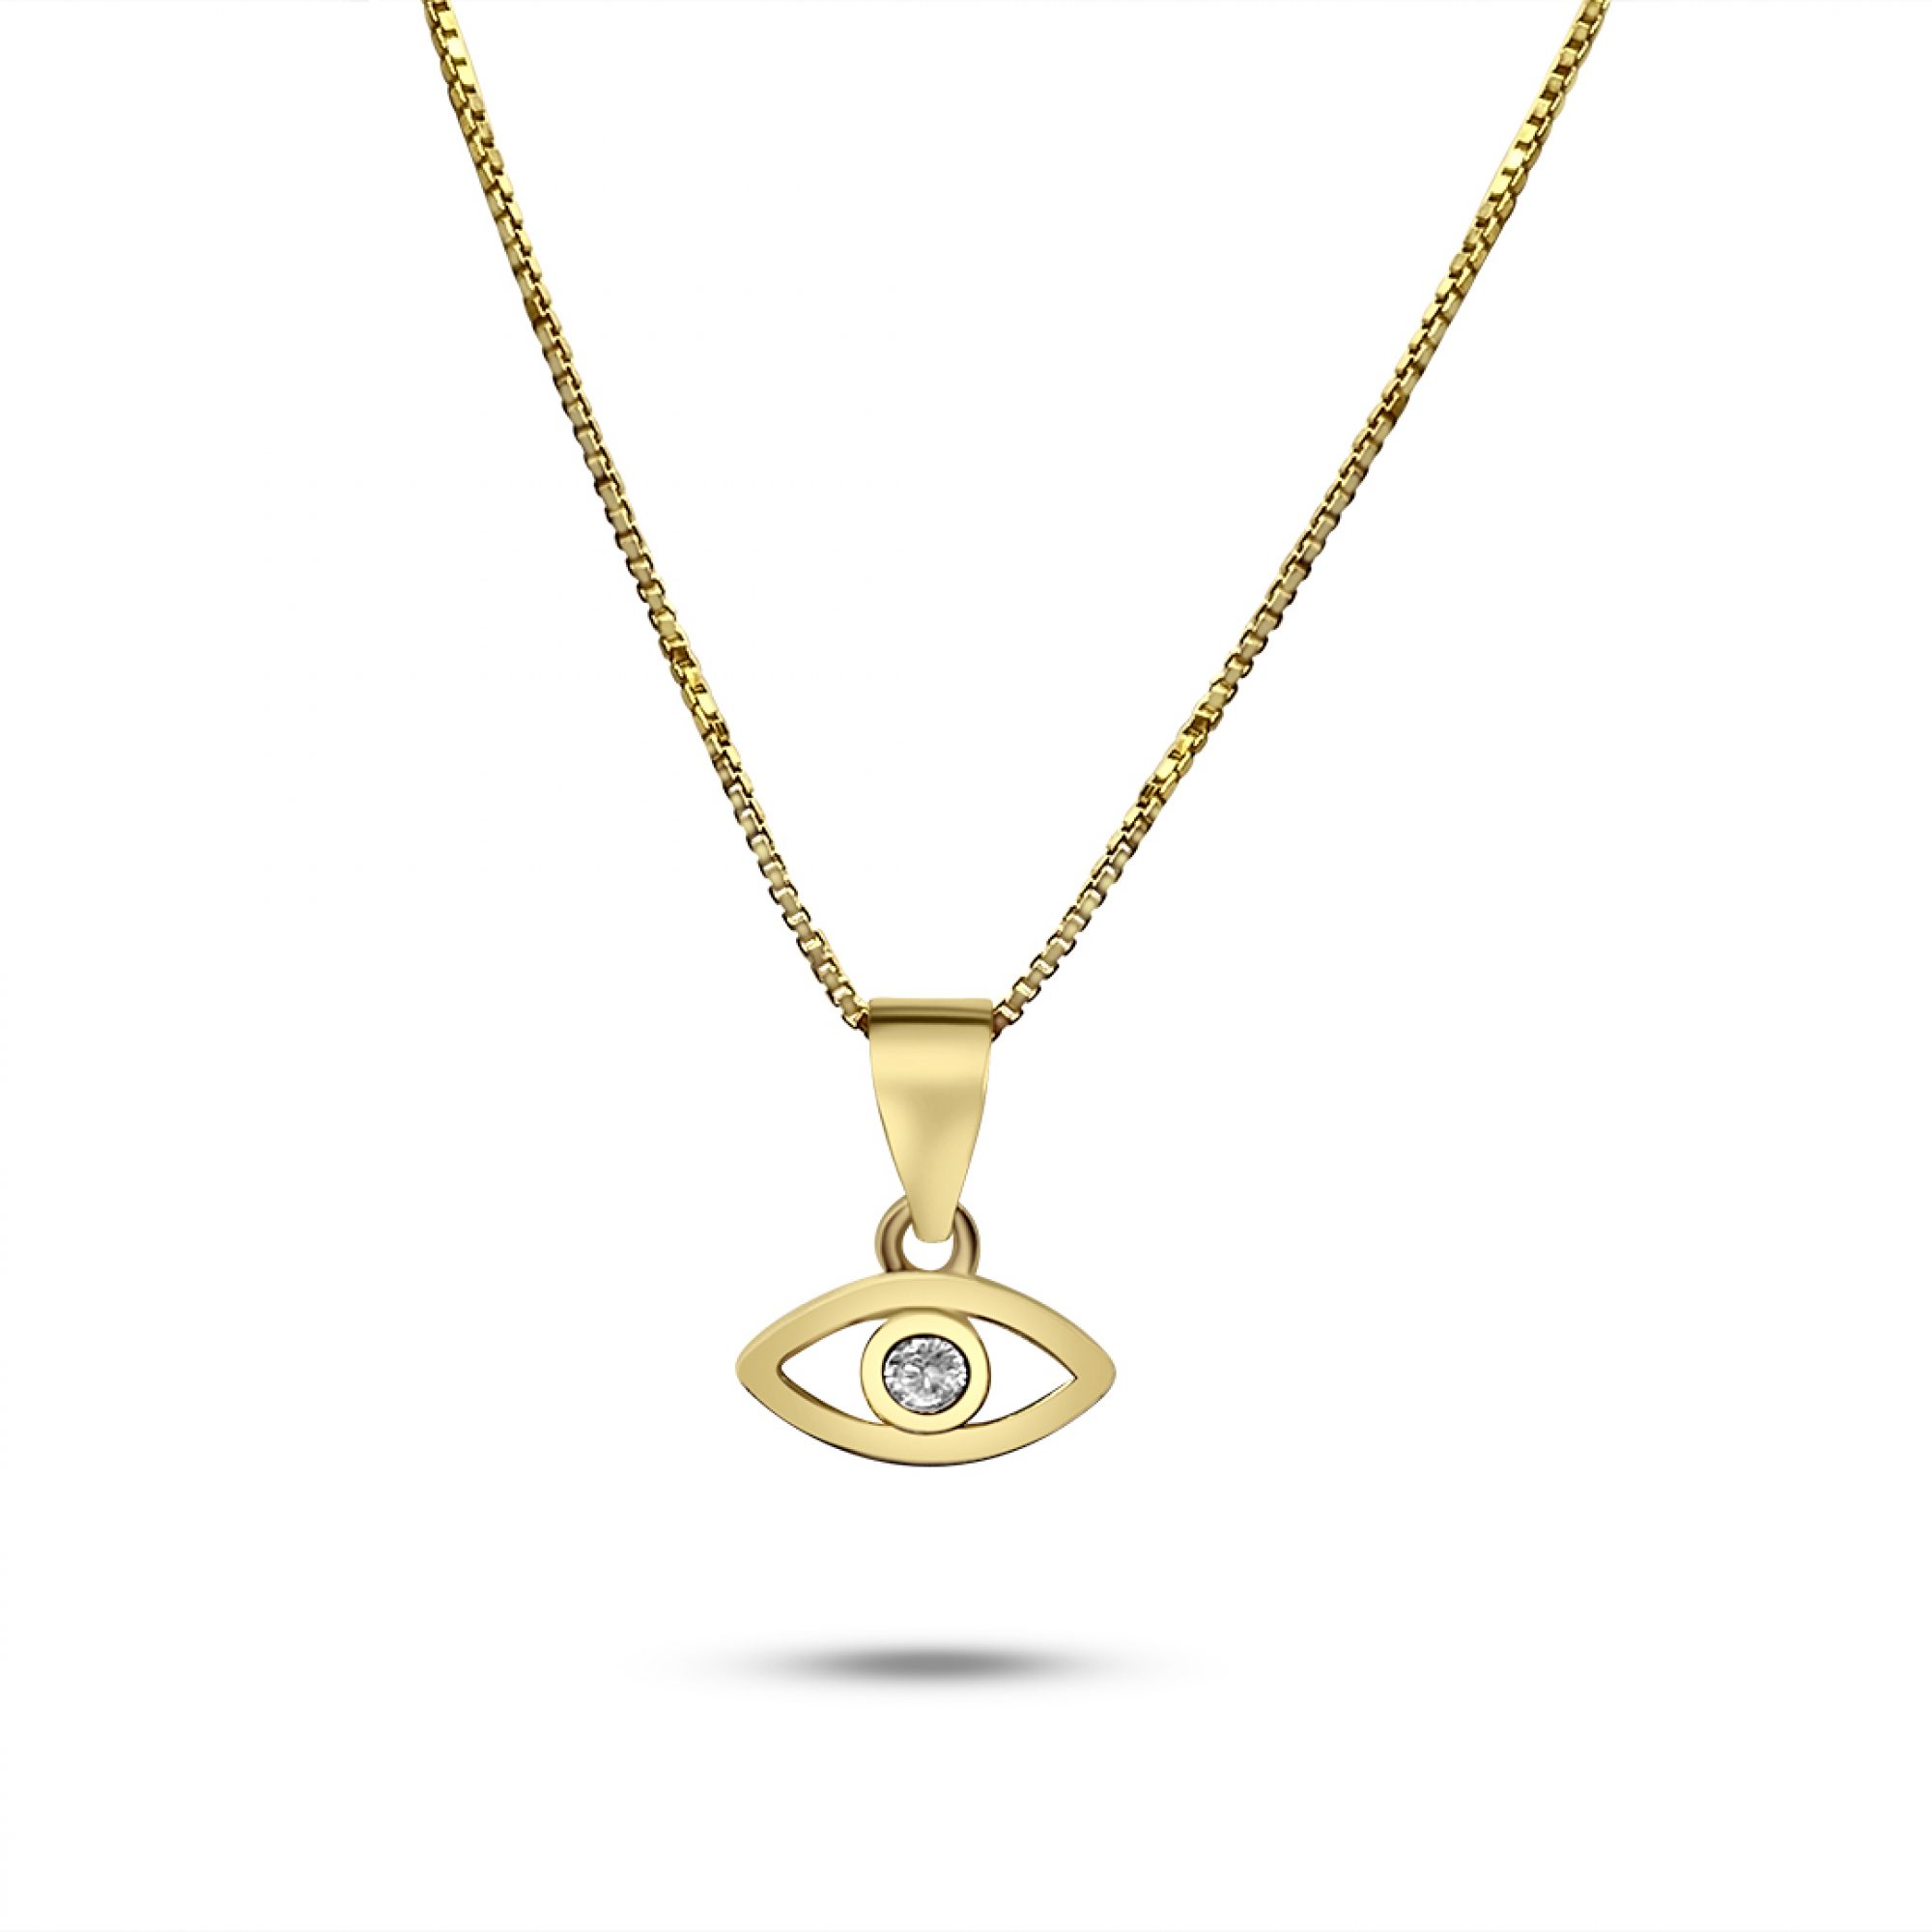 Gold plated eye pendant necklace with zircon stone